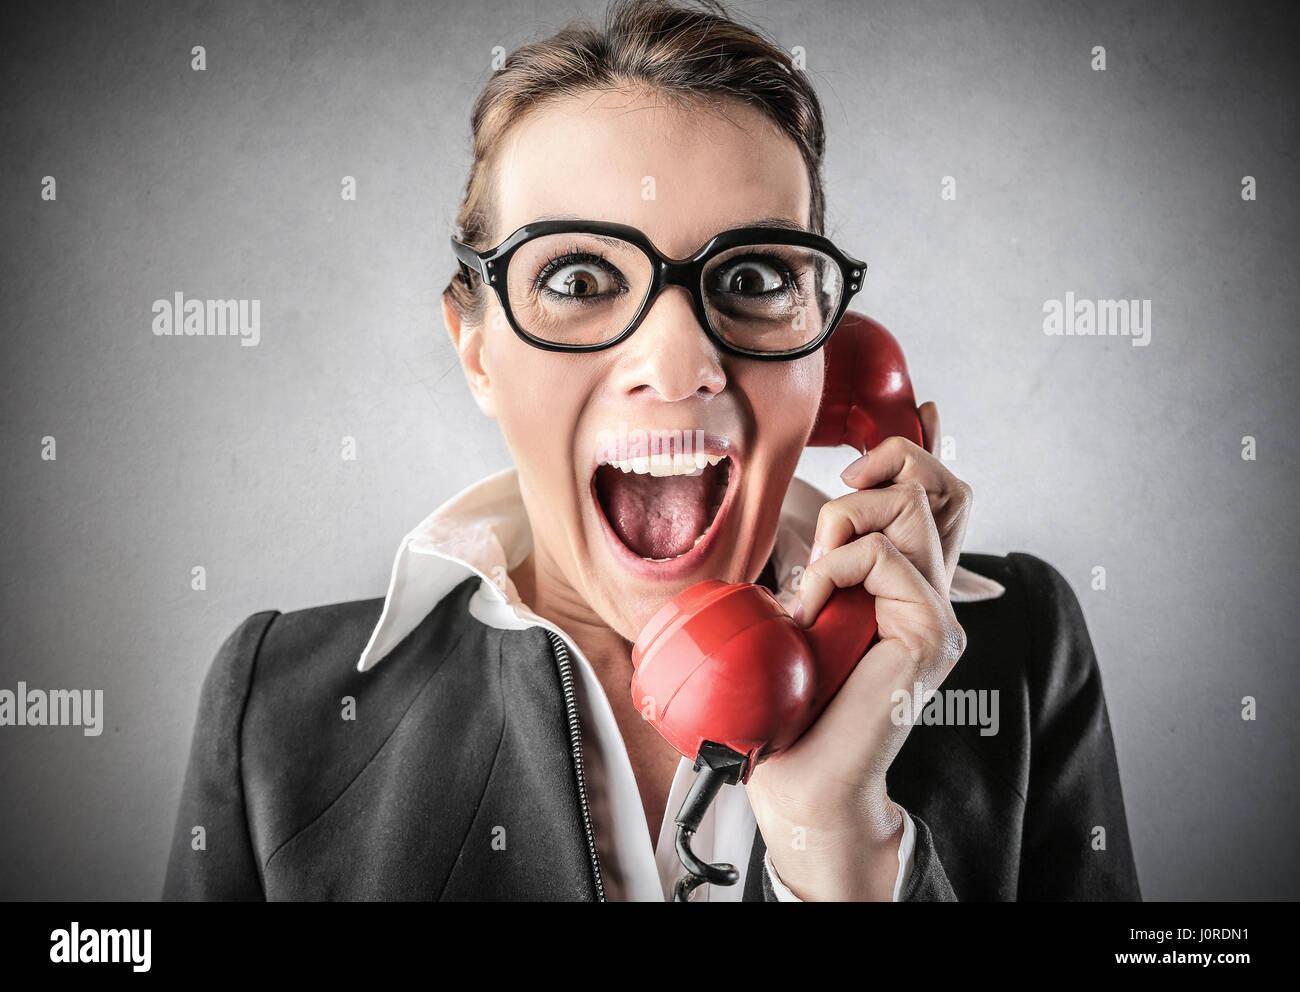 Excited businesswoman making a call Stock Photo